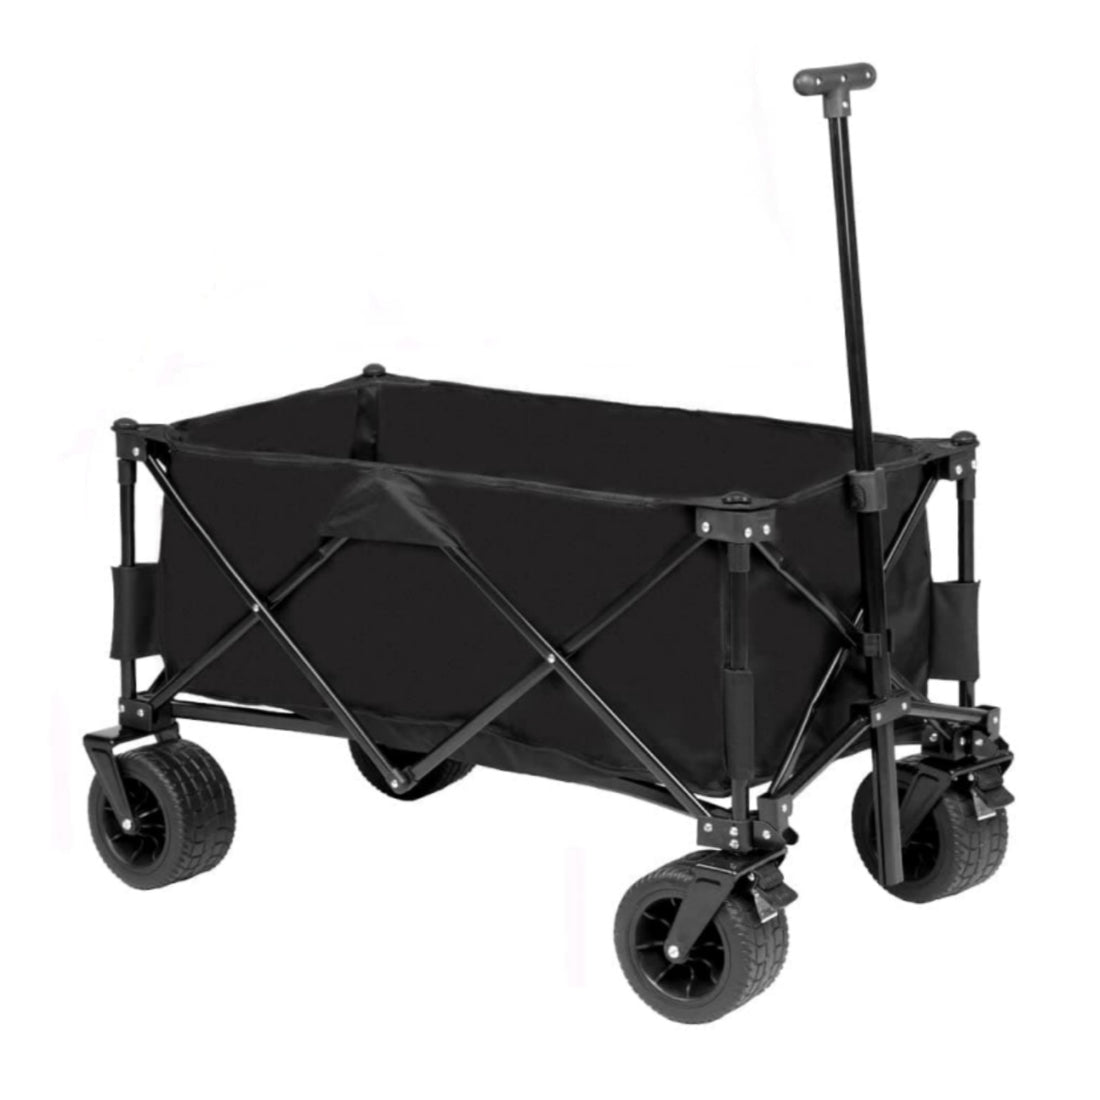 Collapsible Wagon Cart, 330lbs Large Capacity Beach Wagon, Heavy Duty Folding Wagon with All-Terrain Wheels, Portable Outdoor Utility Wagon for Sports Shopping Camping Garden